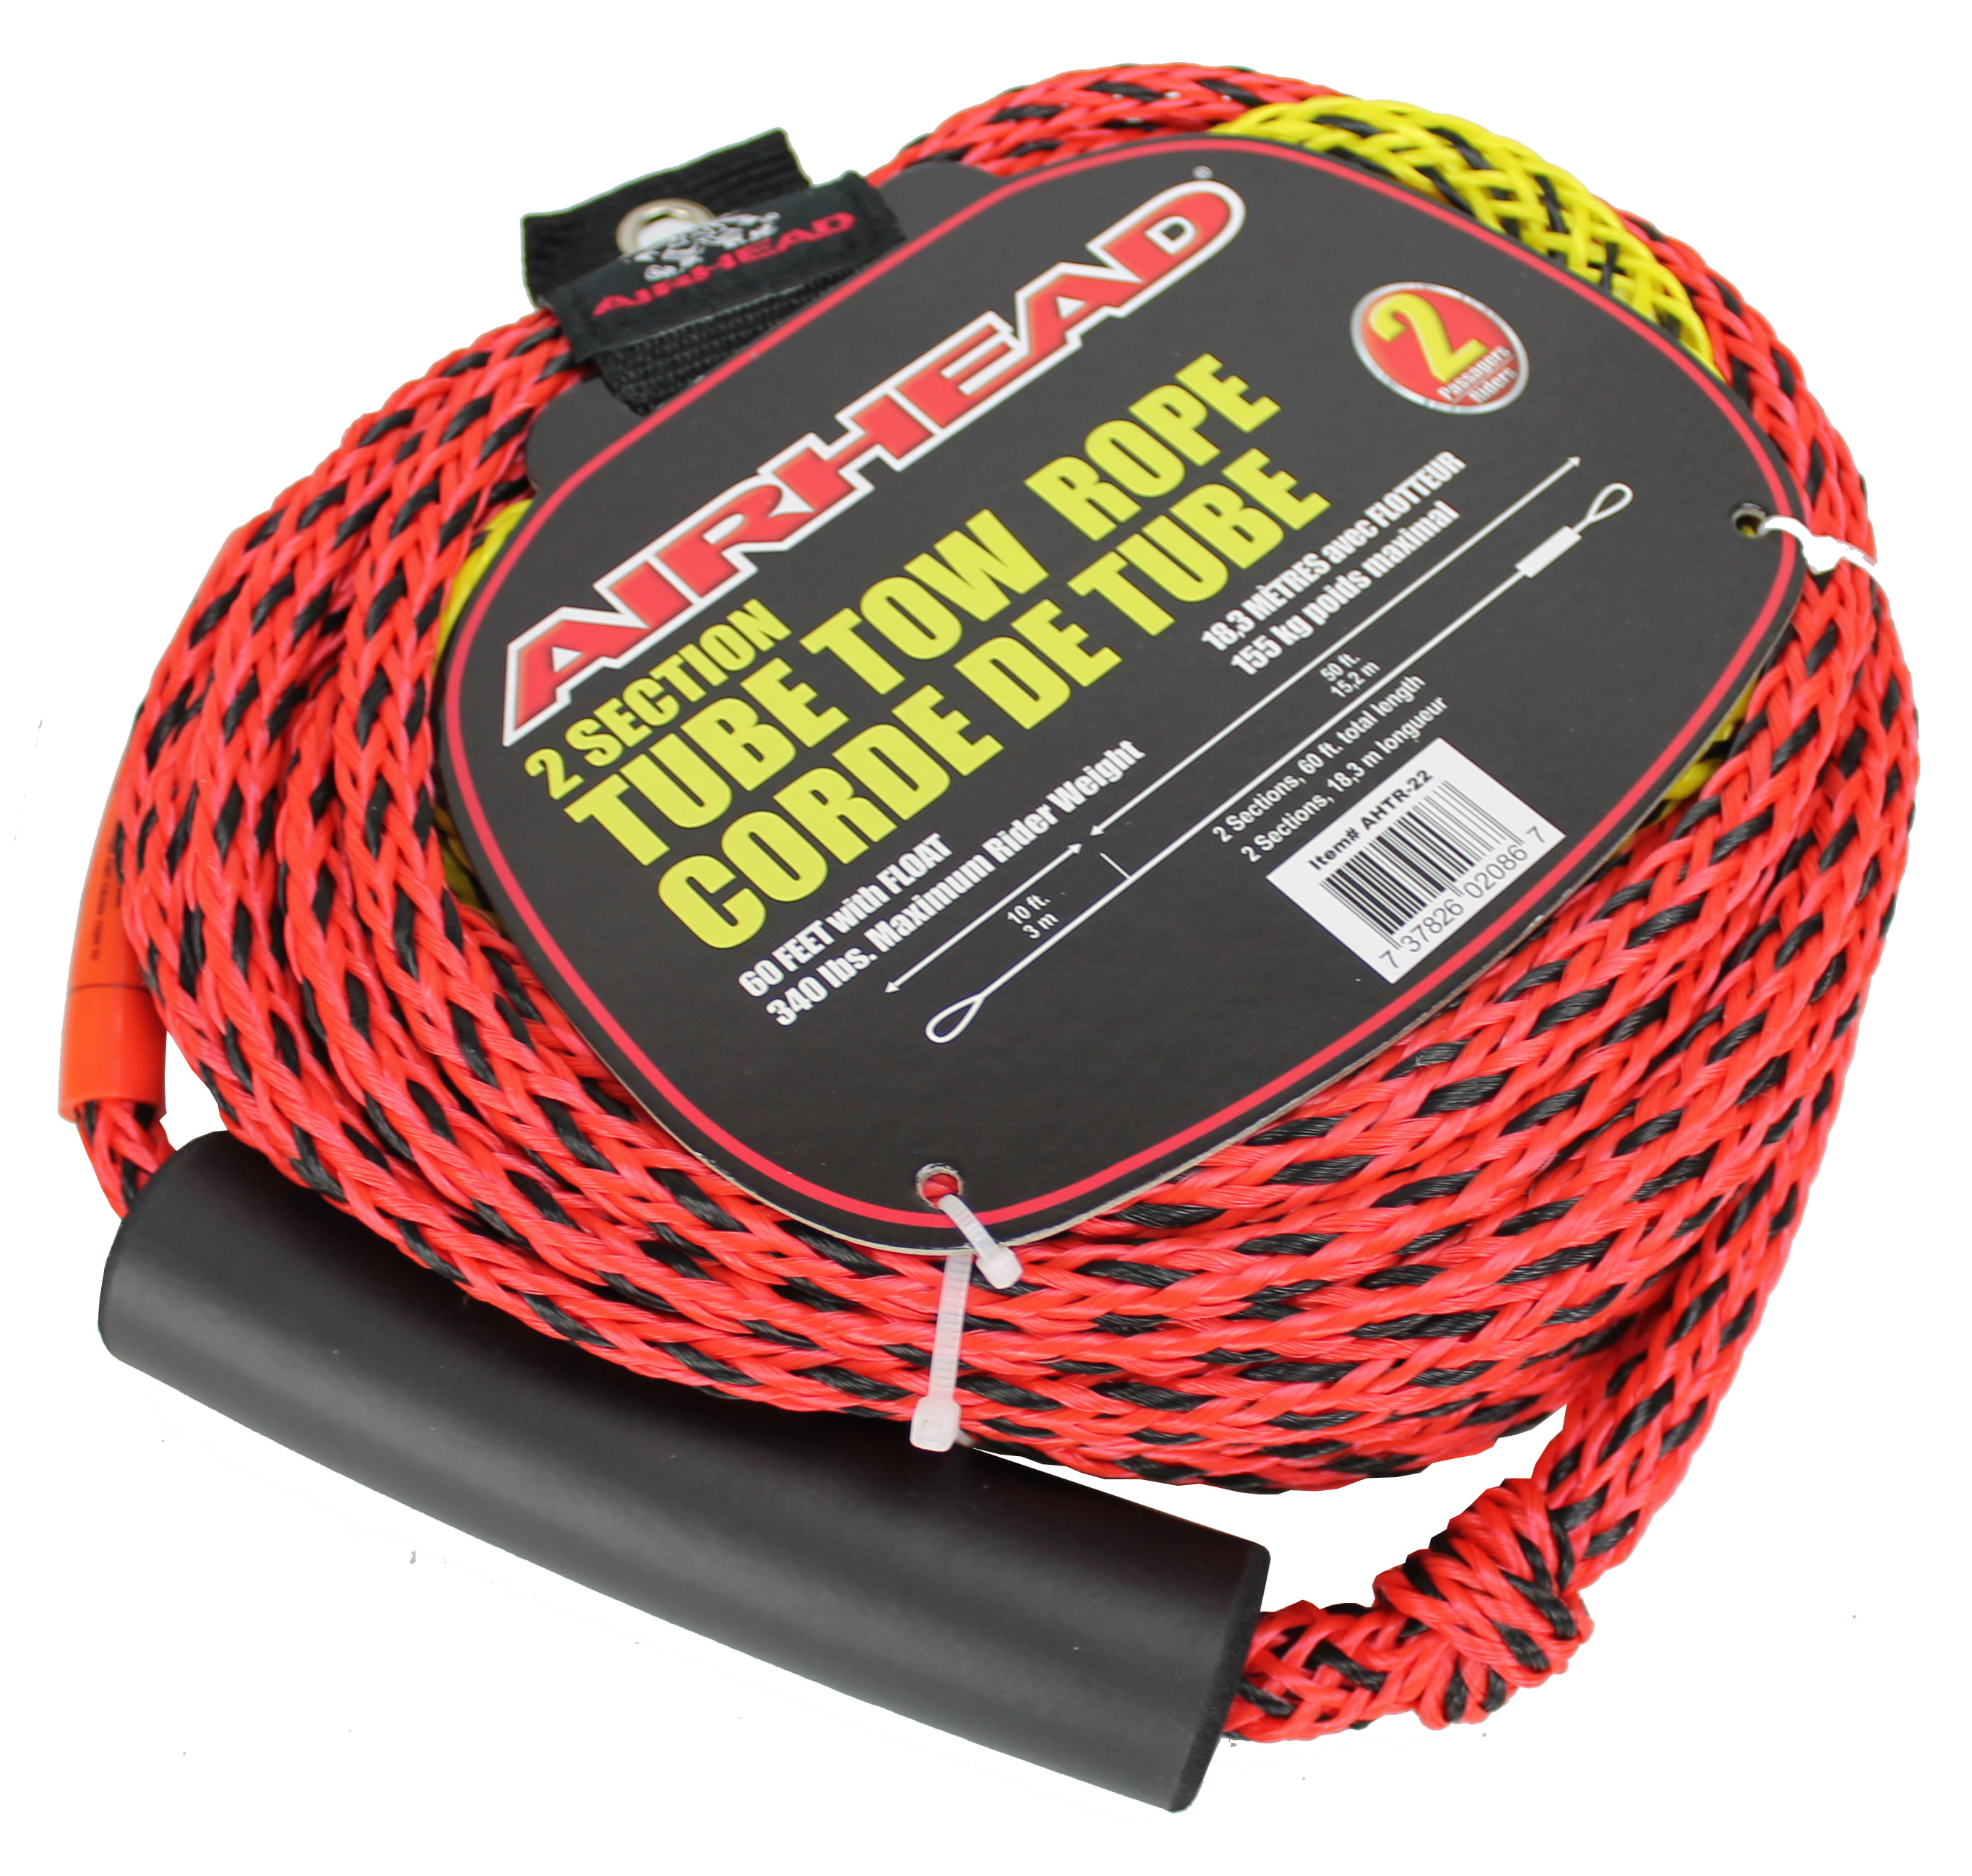 60' 2-section AHTR-4000 Airhead Boating water tube towable tow rope 